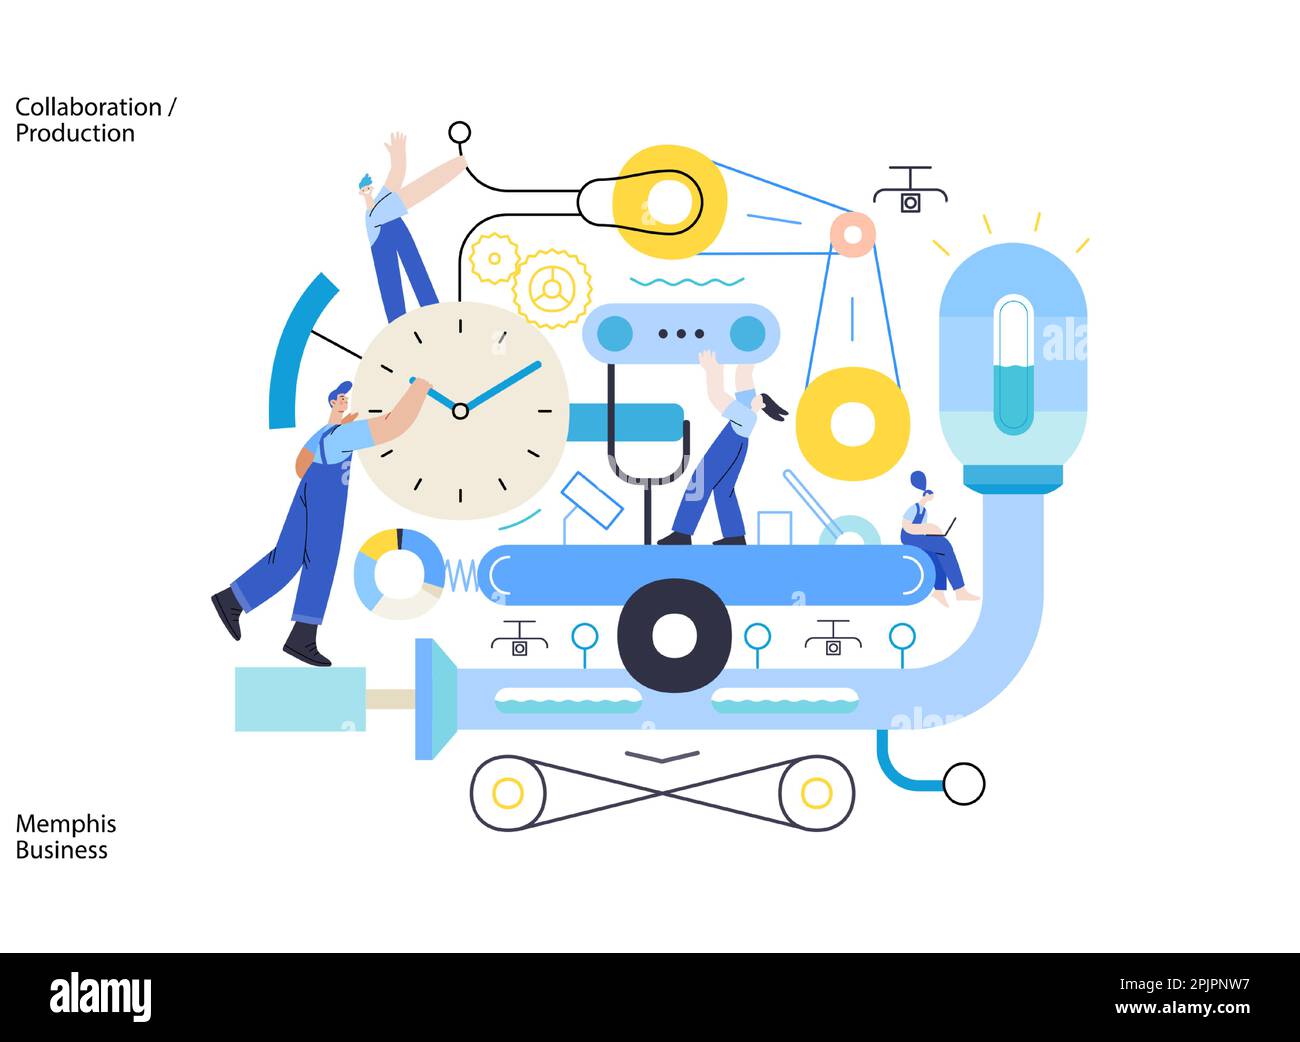 Memphis business illustration. Collaboration -modern flat vector concept illustration of team, people working together on a product mechanism in a fac Stock Vector